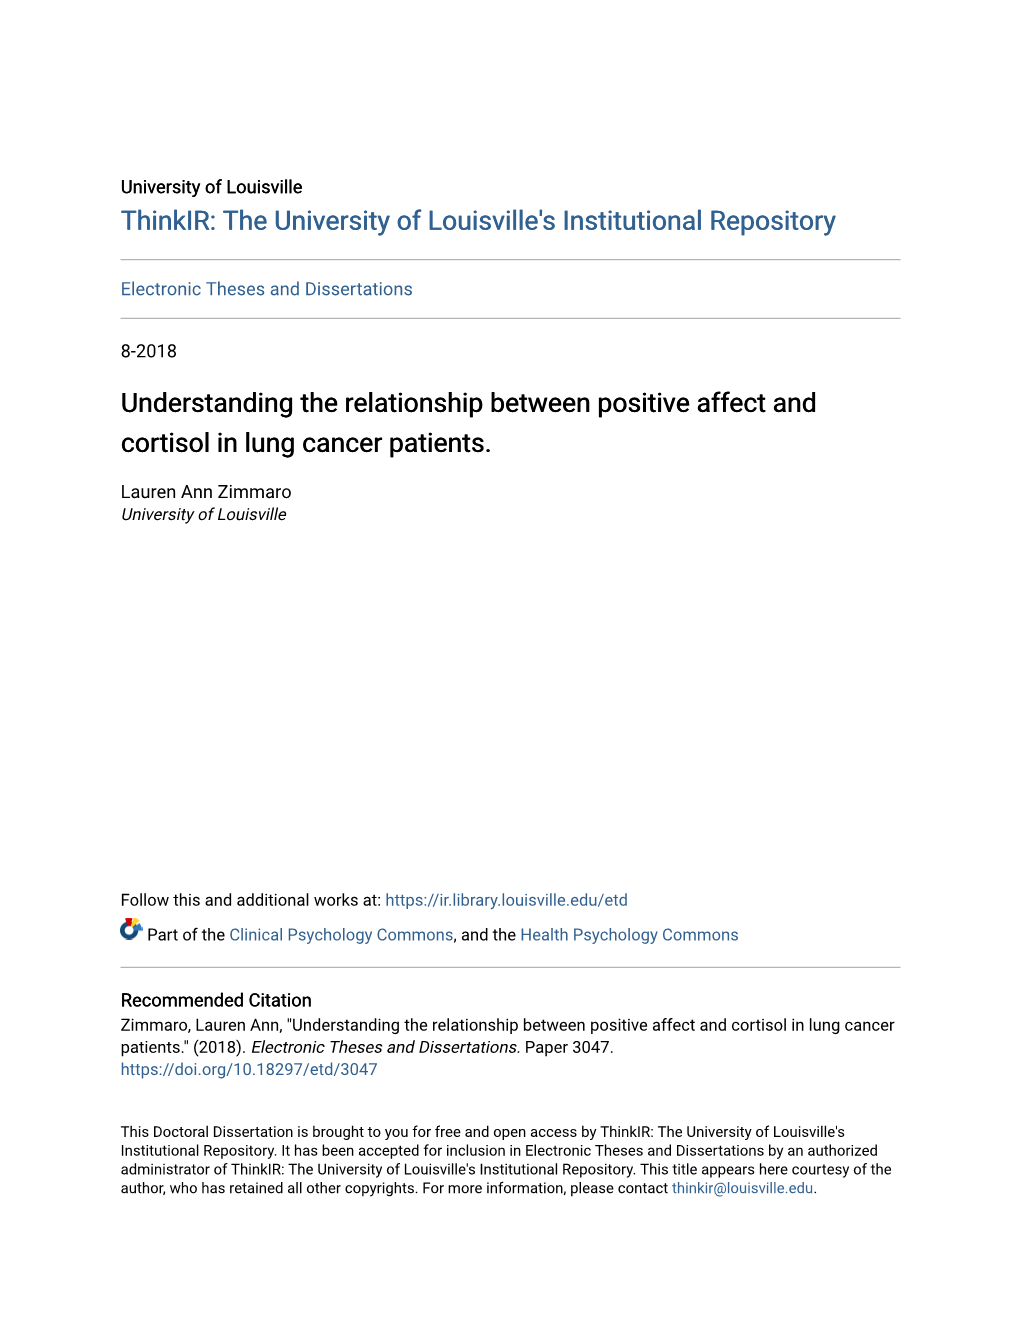 Understanding the Relationship Between Positive Affect and Cortisol in Lung Cancer Patients